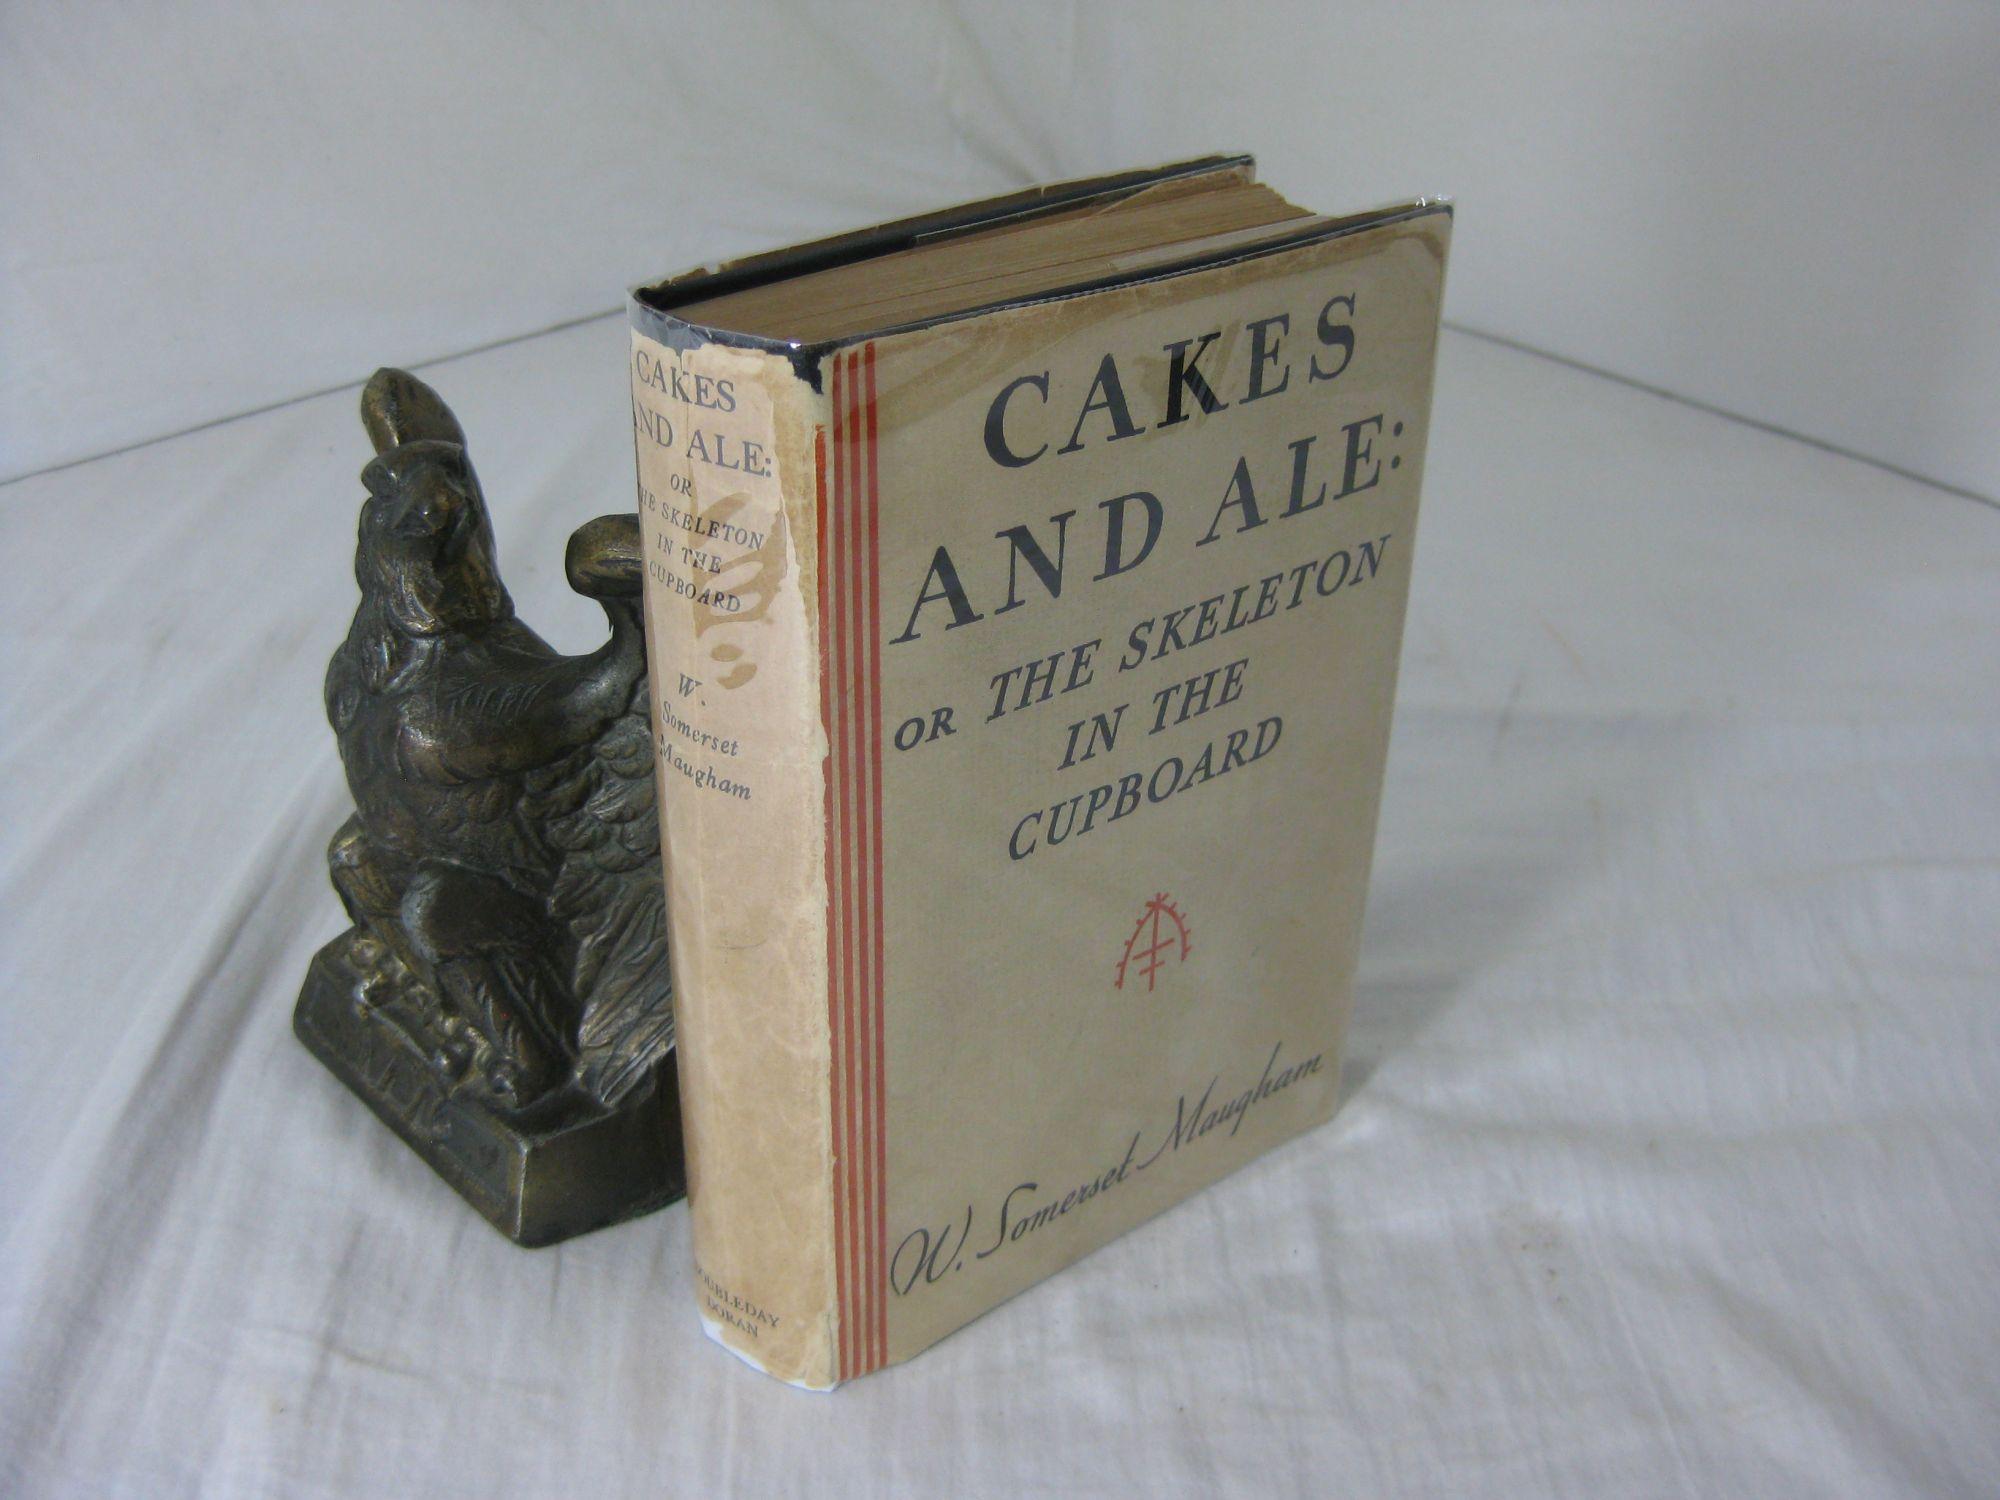 Cakes and Ale by W. Somerset Maugham